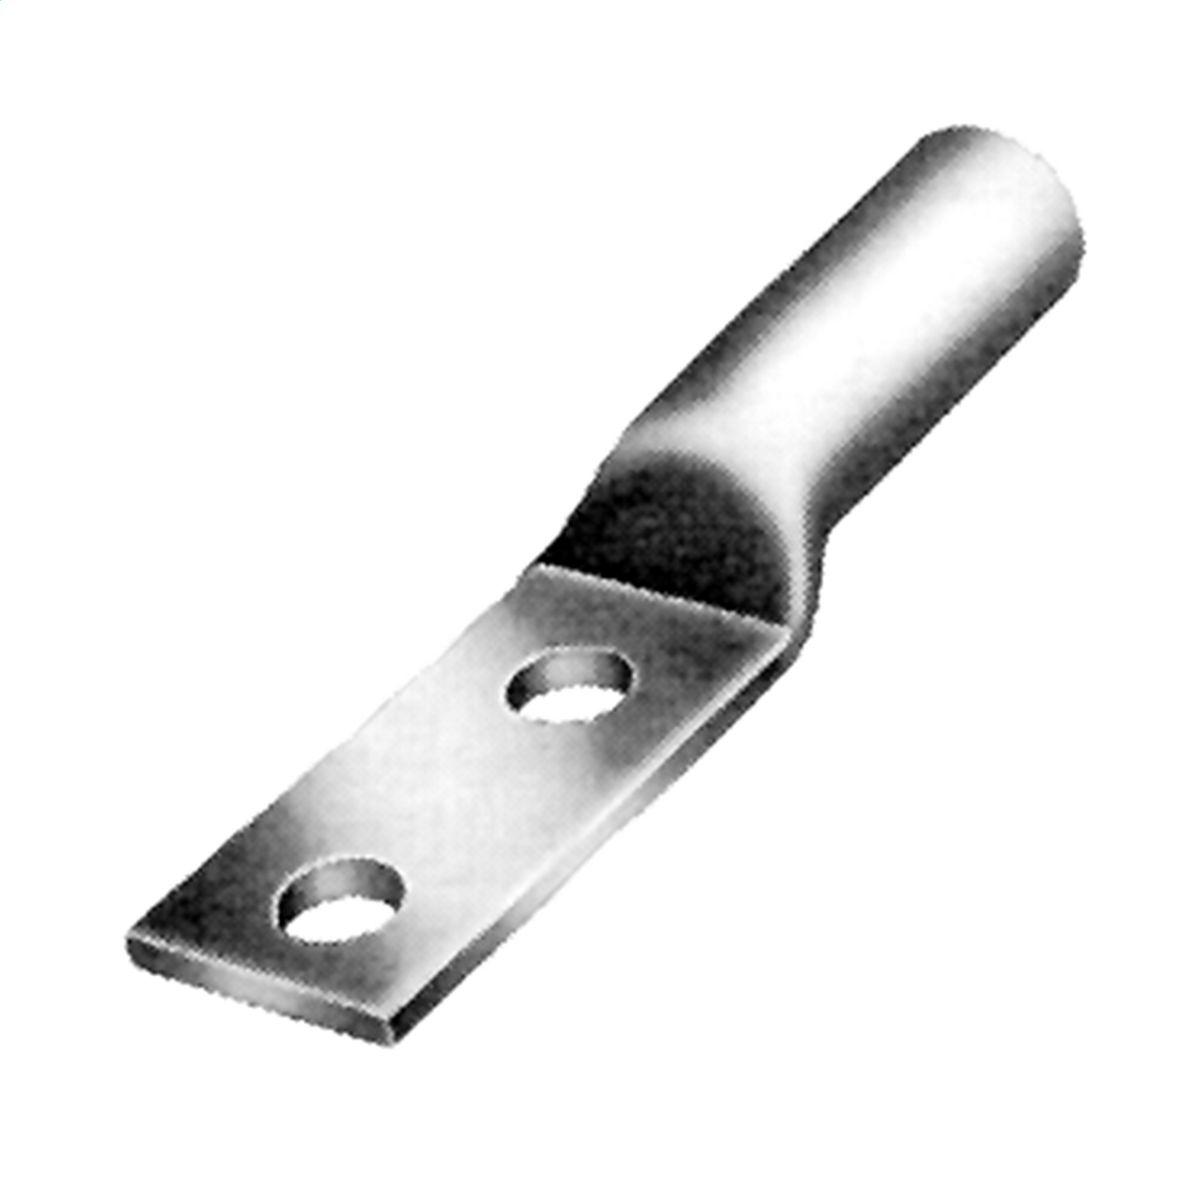 Hubbell VAUL75012BN Aluminum Compression Terminal for 700 - 750 AL, 556.5 30/7, 636 18/1, 605 24/7, 26/7, 715.5 36/1, 750 - 800 COMPACT  ; Connectors are prefilled with rubber compatible inhibitor and sealed with color coded end caps. ; 